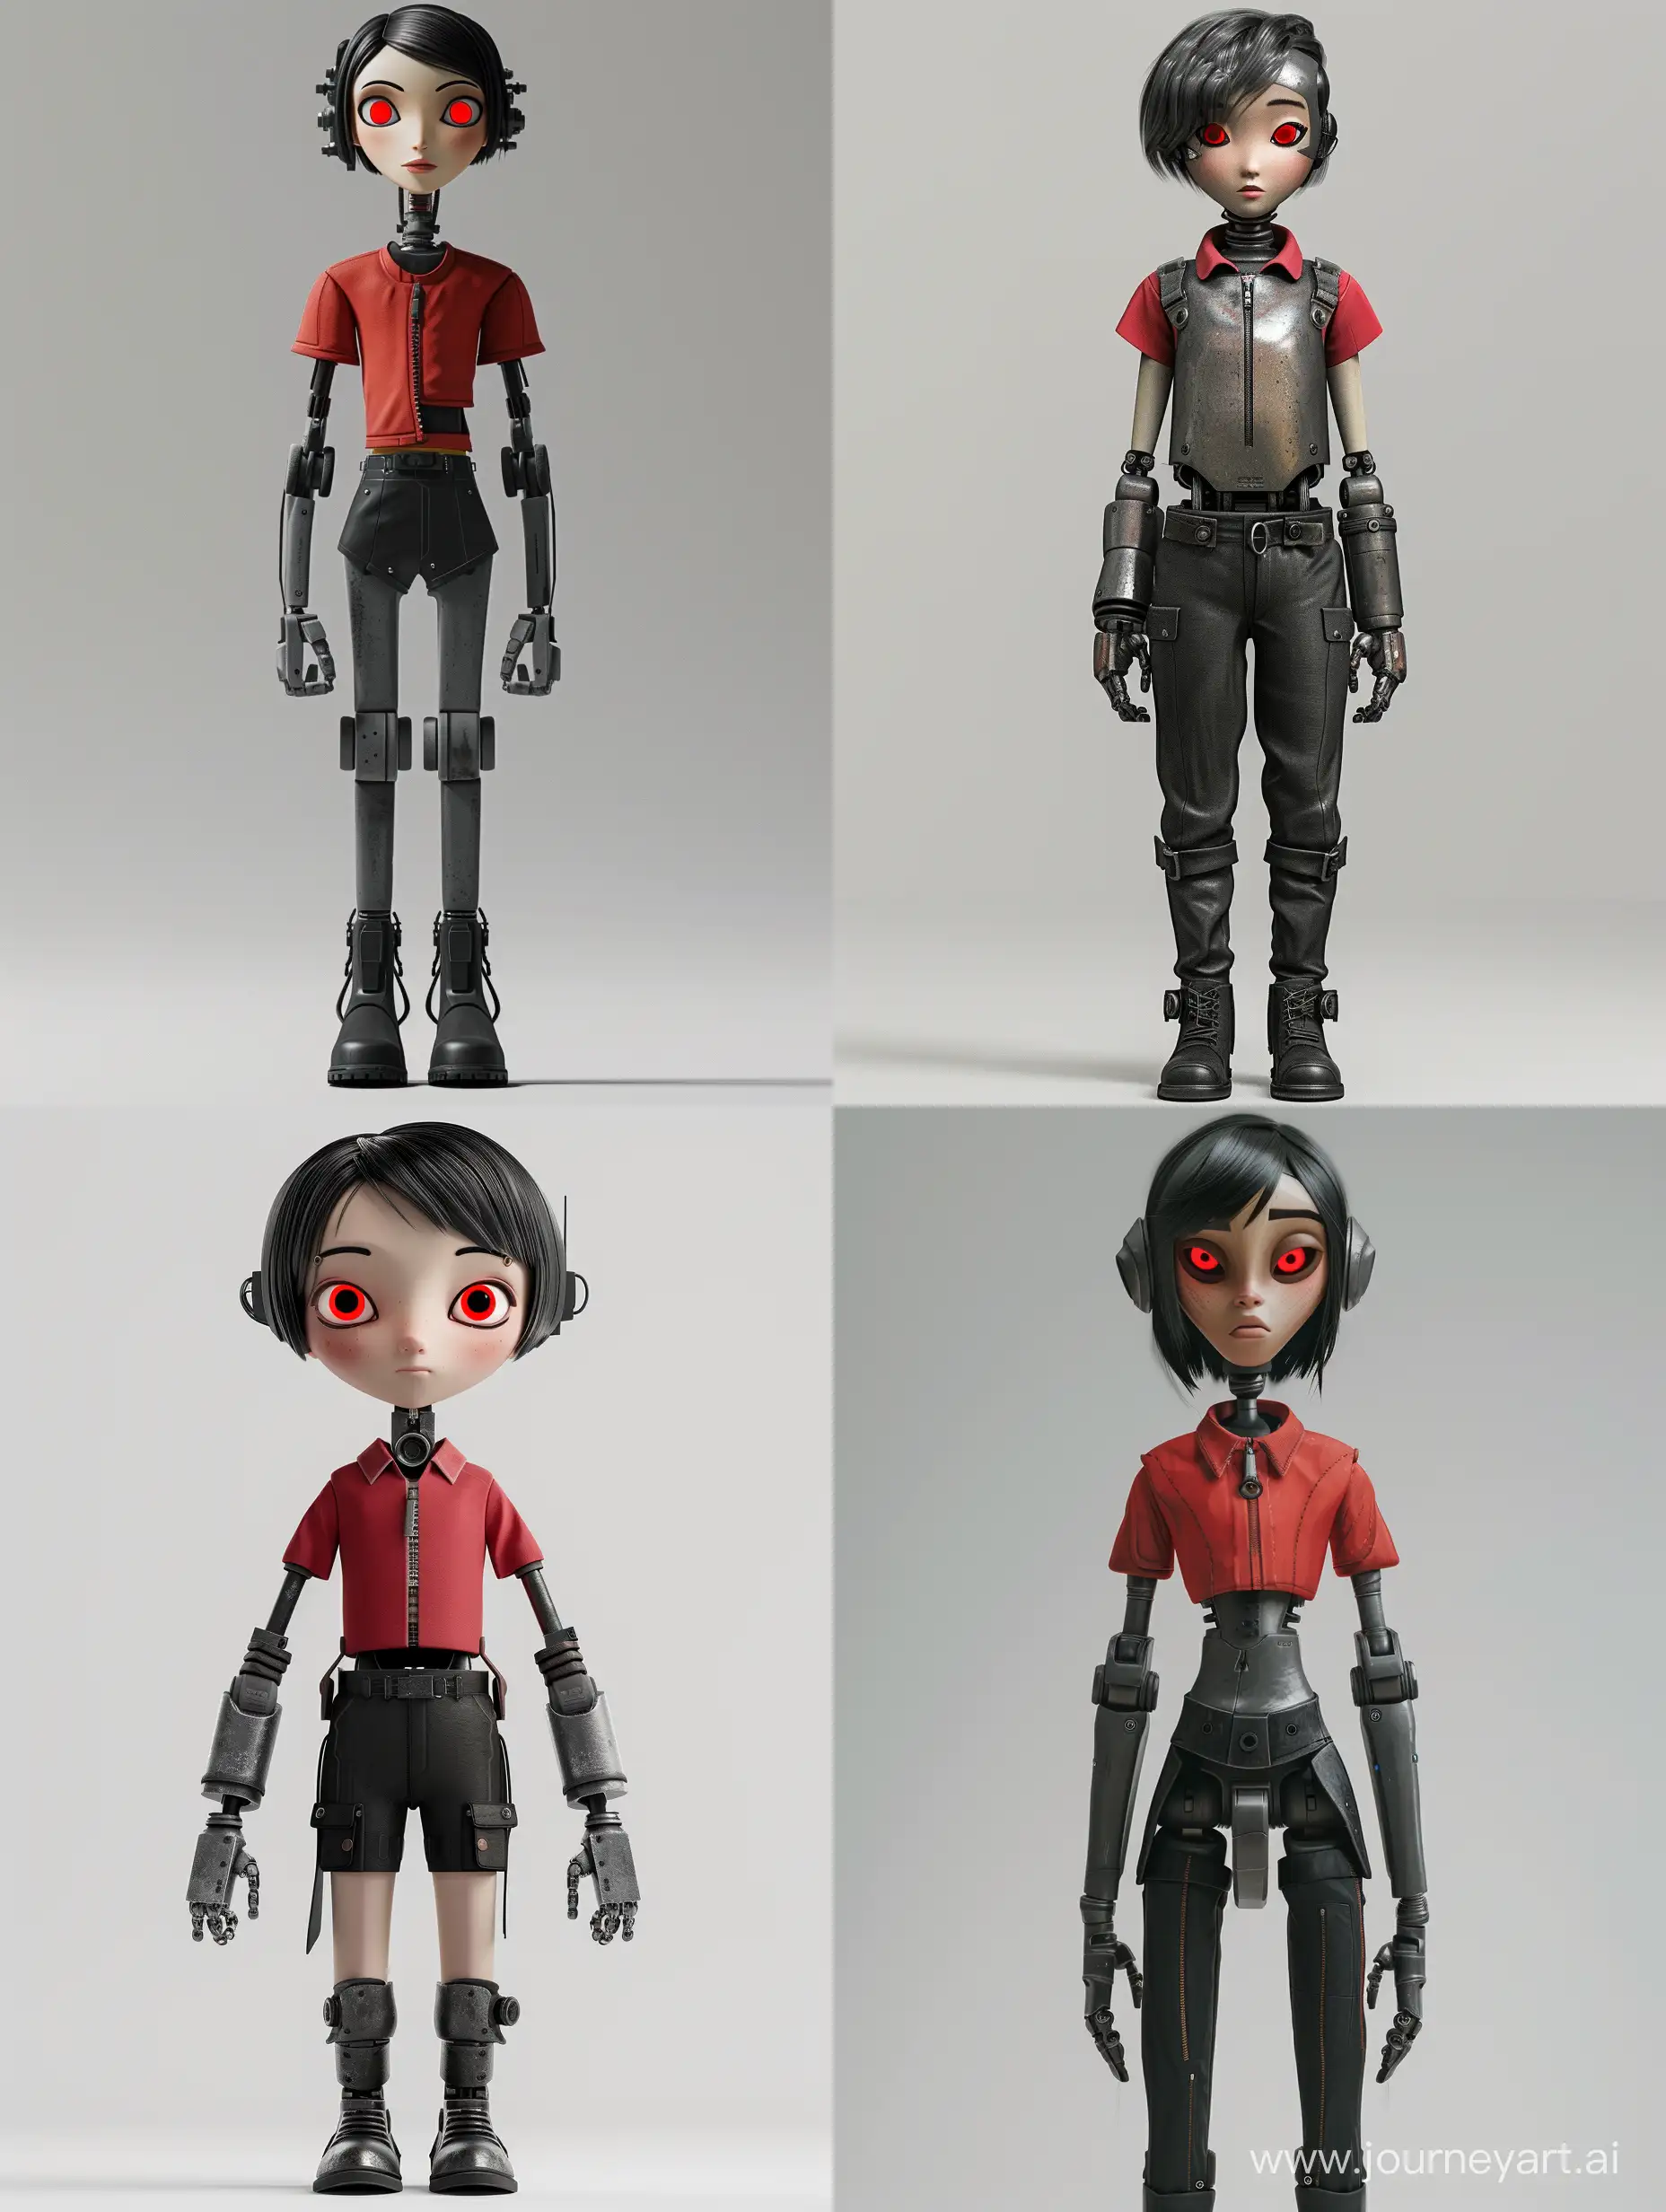 Futuristic-Cartoon-Robot-Girl-with-Red-Anime-Eyes-and-Stand-Up-Collar